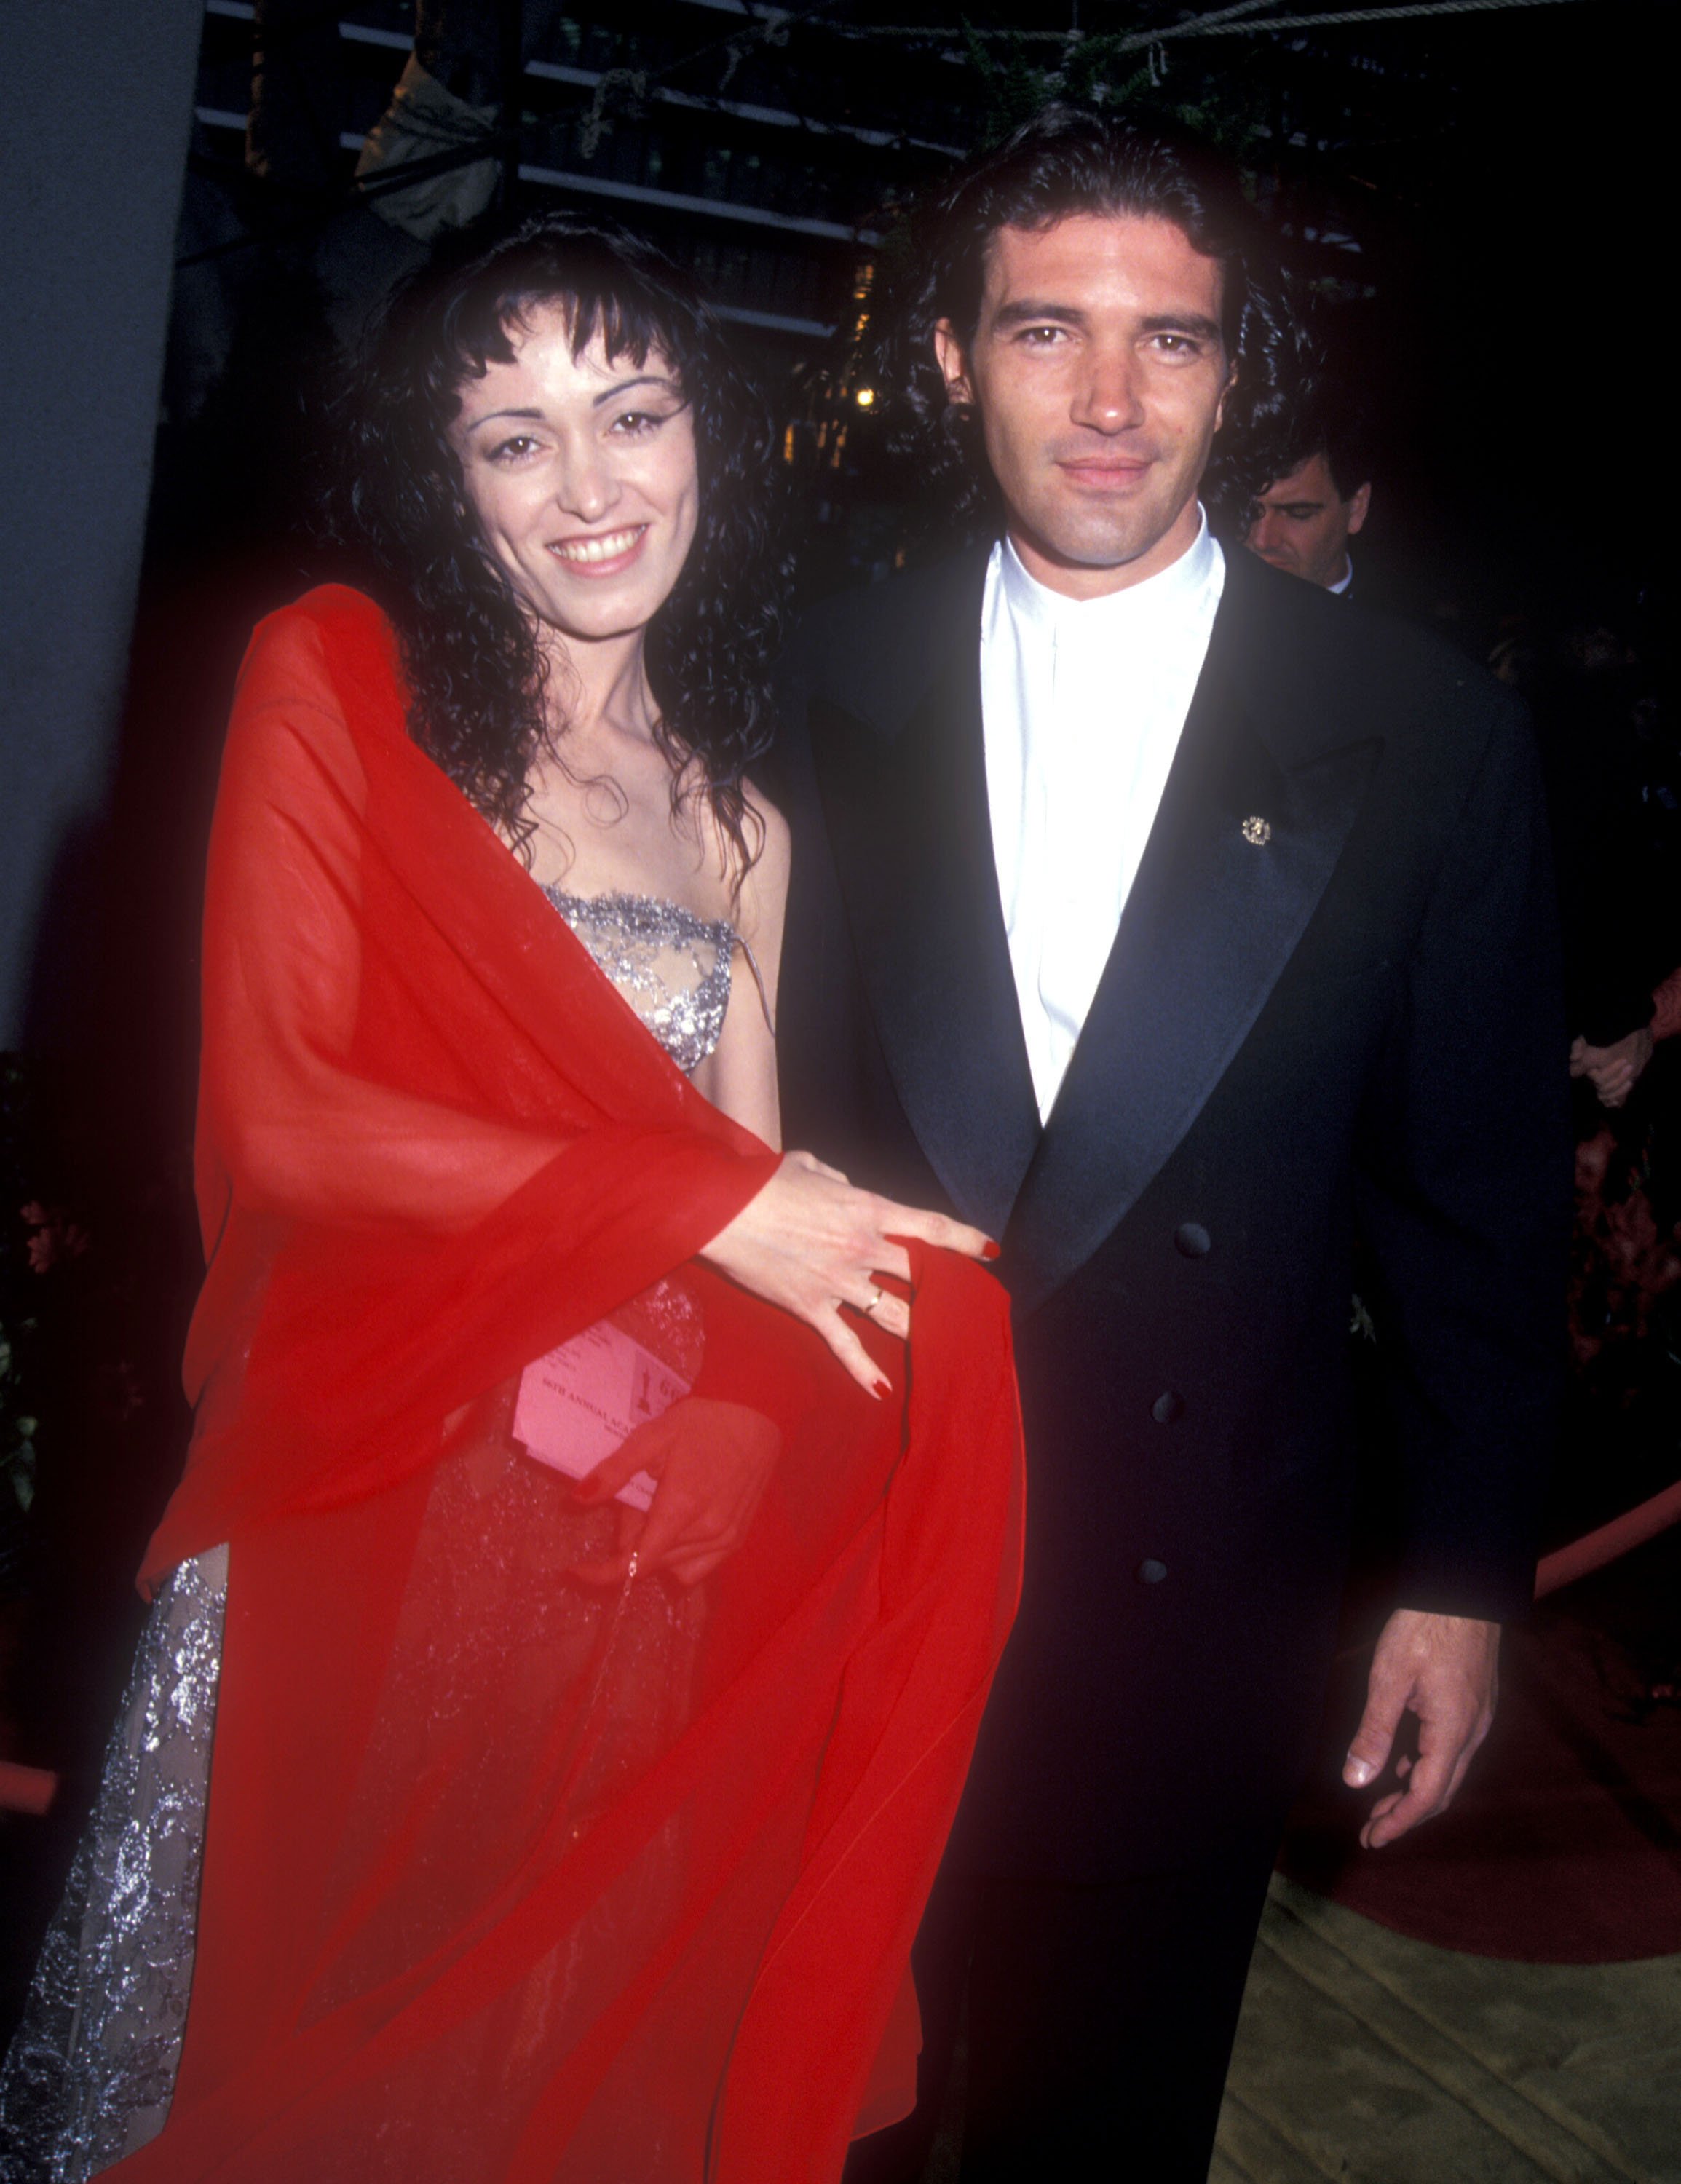 Antonio Banderas and Ana Leza are photographed during the 66th Annual Academy Awards at Dorothy Chandler Pavillion in Los Angeles, California | Source: Getty Images